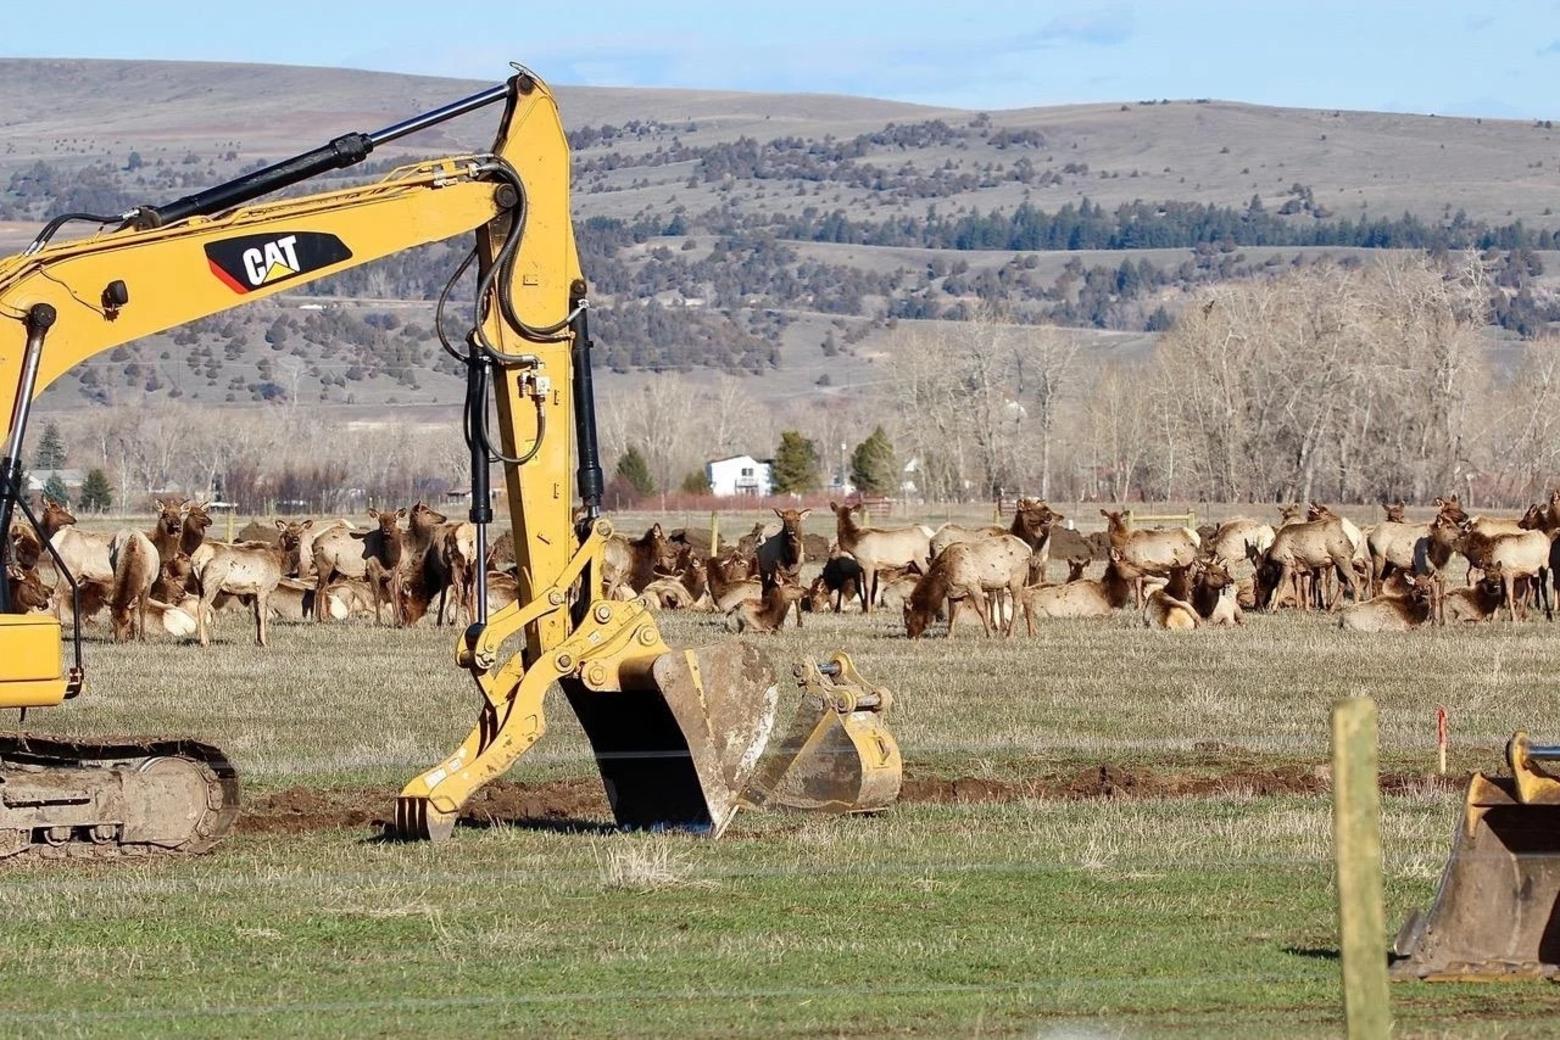 Rapid growth in Gallatin Valley is crowding wildlife and traffic creating dangerous routes over major thoroughfares like Highway 191 in Gallatin Gateway. Photo by Holly Pippel